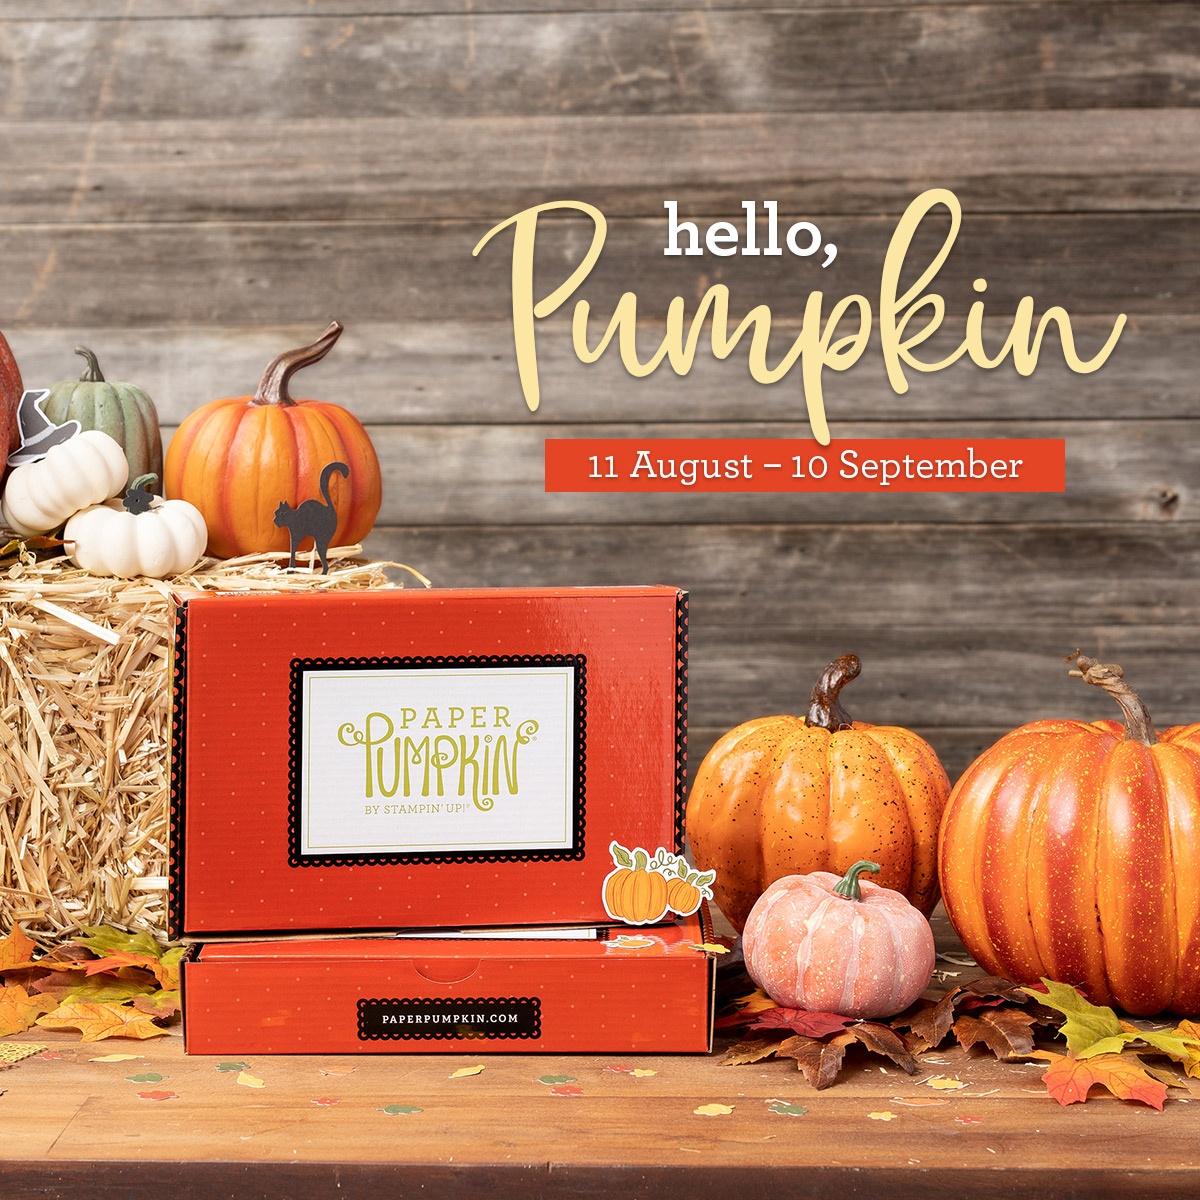 Would you like a stamping kit delivered right to mailbox each and every month with a new stamp set, ink pad and project to create? Look no further than the Paper Pumpkin Kit from Stampin' Up! These ALL Inclusive kits are perfect for beginners or more advanced stampers. See my blog here for details: https://wp.me/p59VWq-bq2. #stampinup #paperpumpkin #thestampcamp #kits